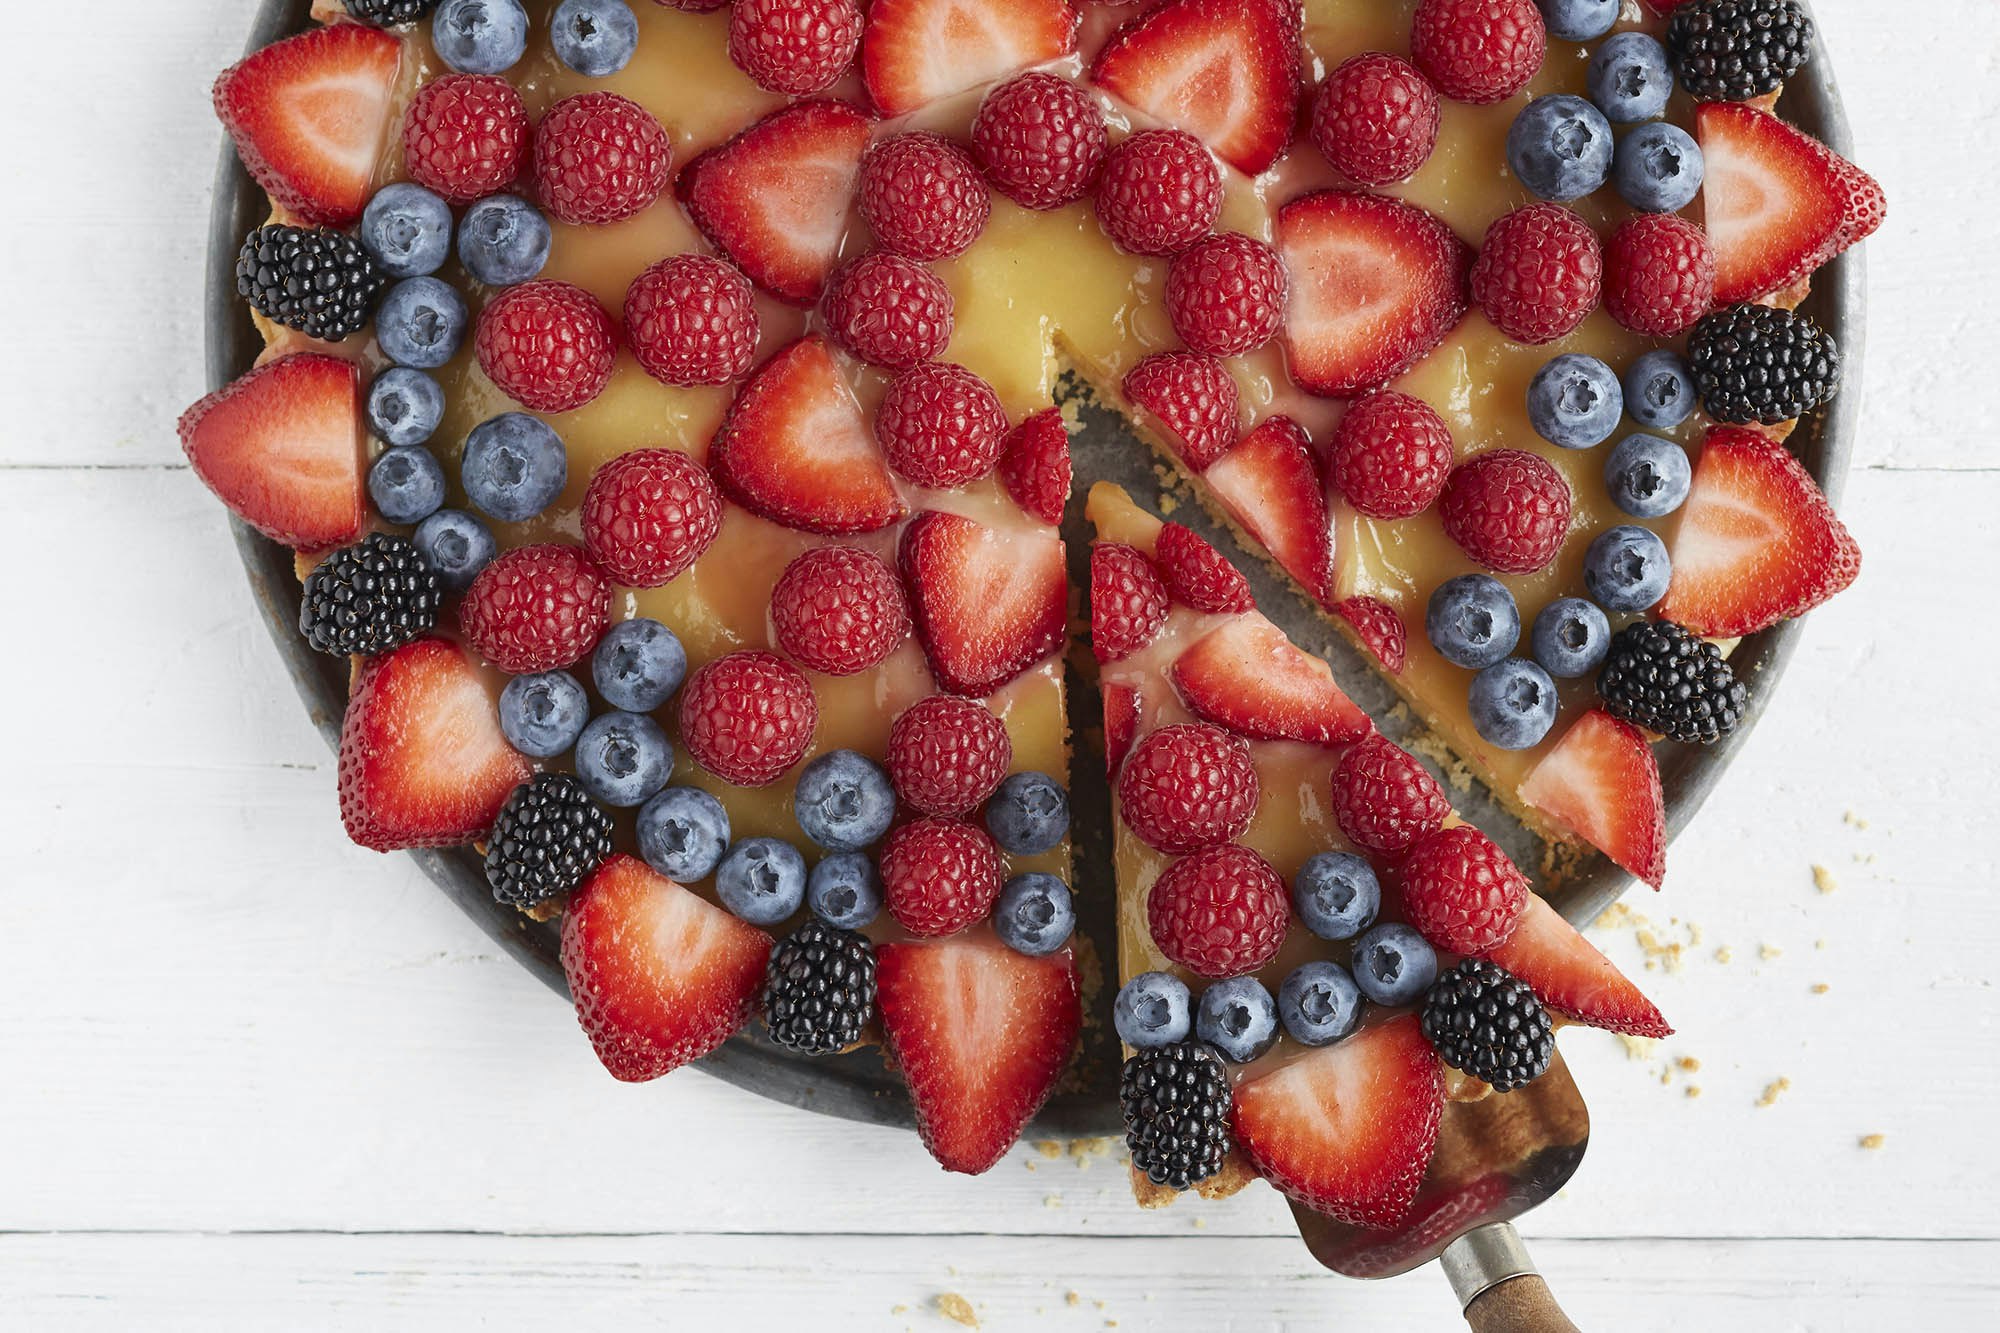 Fruit pizza decorated with berries in a design on top